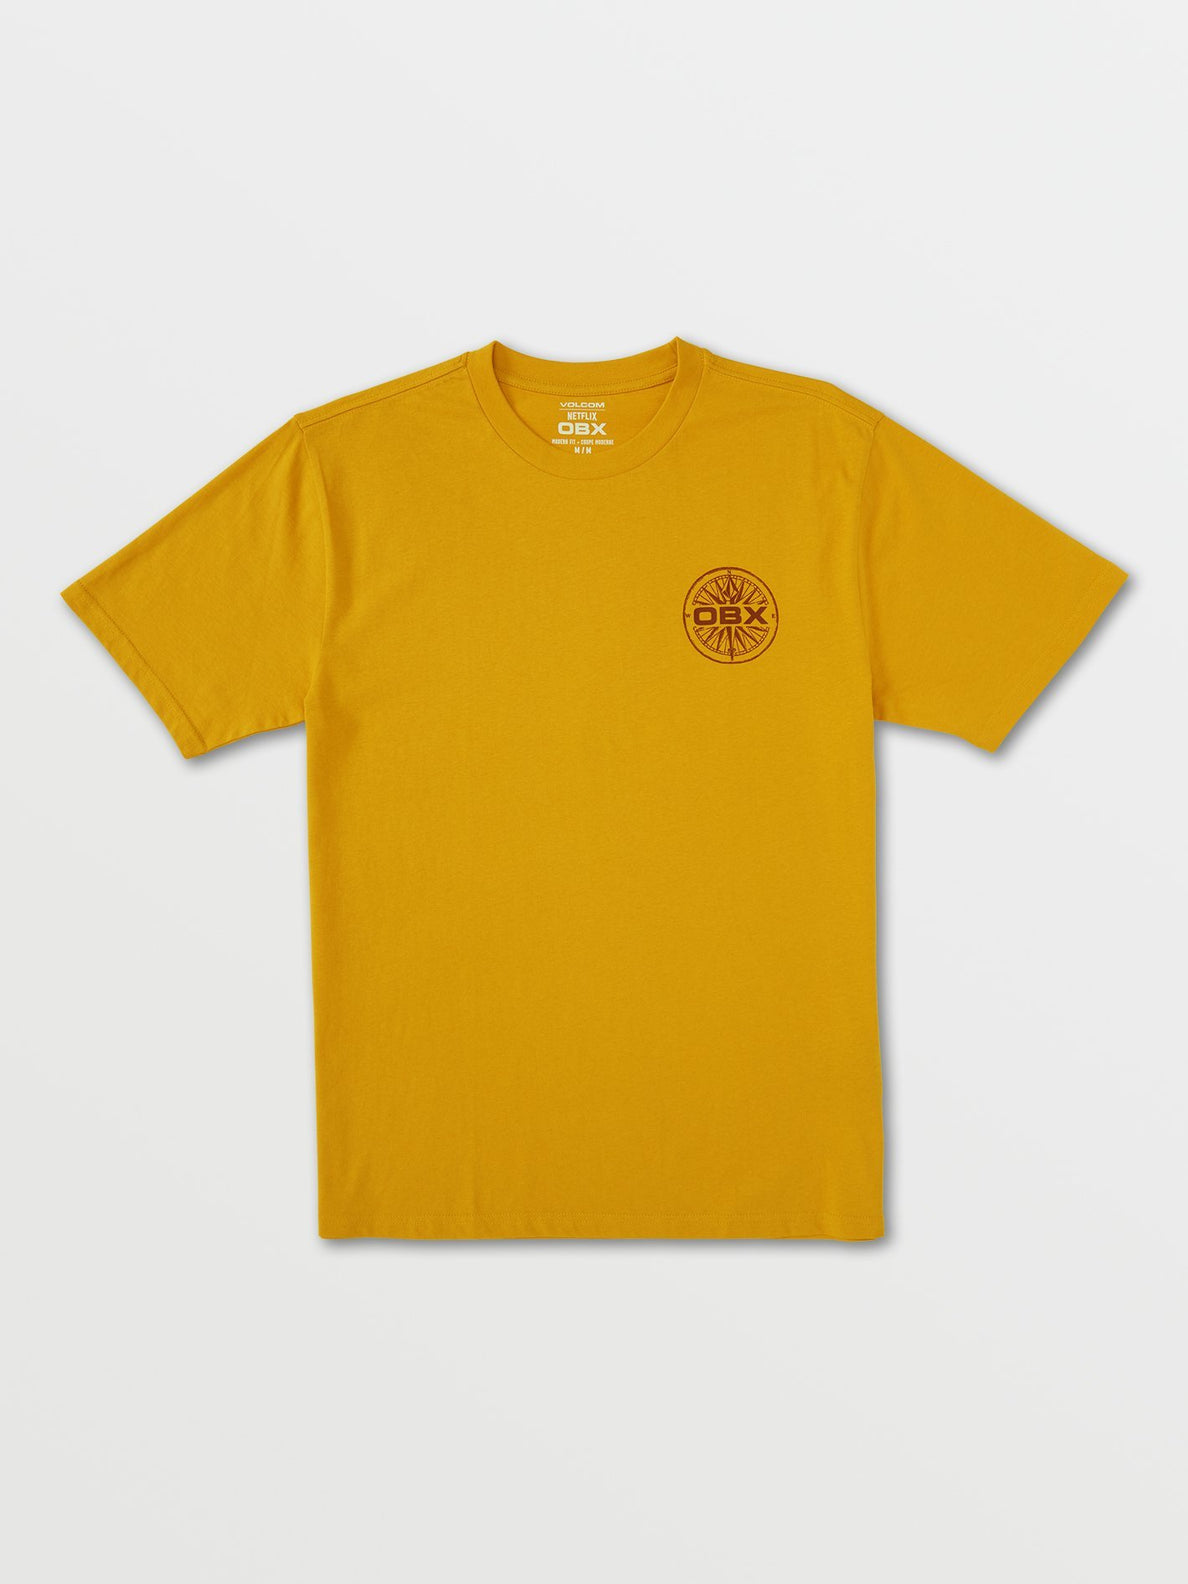 OBX Pope Compass  Short Sleeve Tee - Vintage Gold (A3502102_VGD) [F]